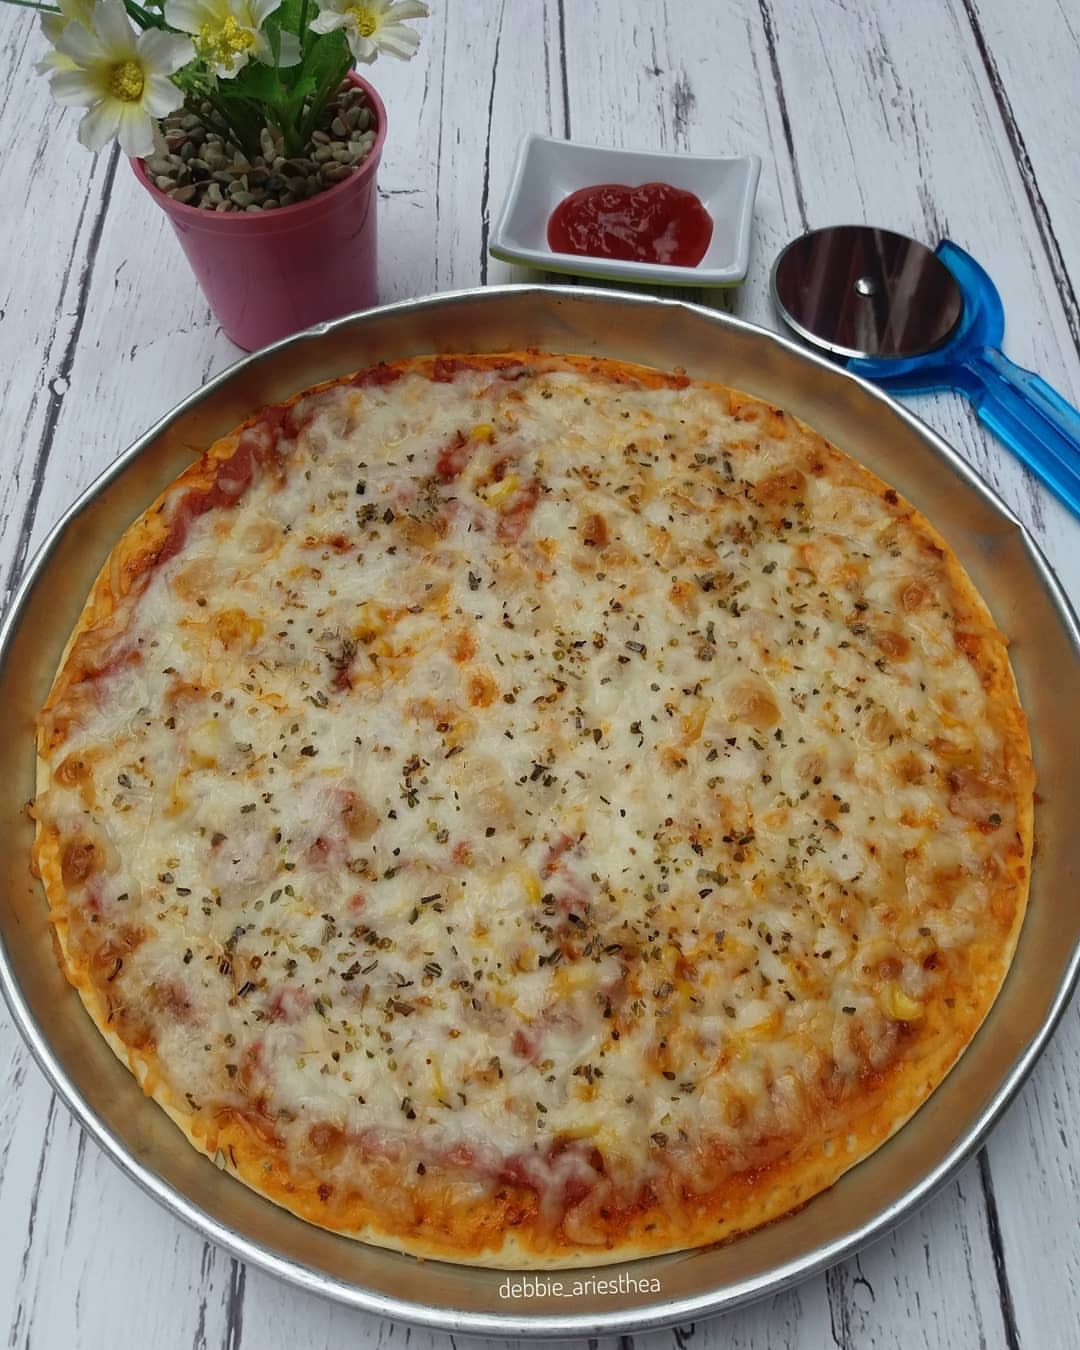 Ham Mozzarella Pizza is one of the homemade pizza’s toppings